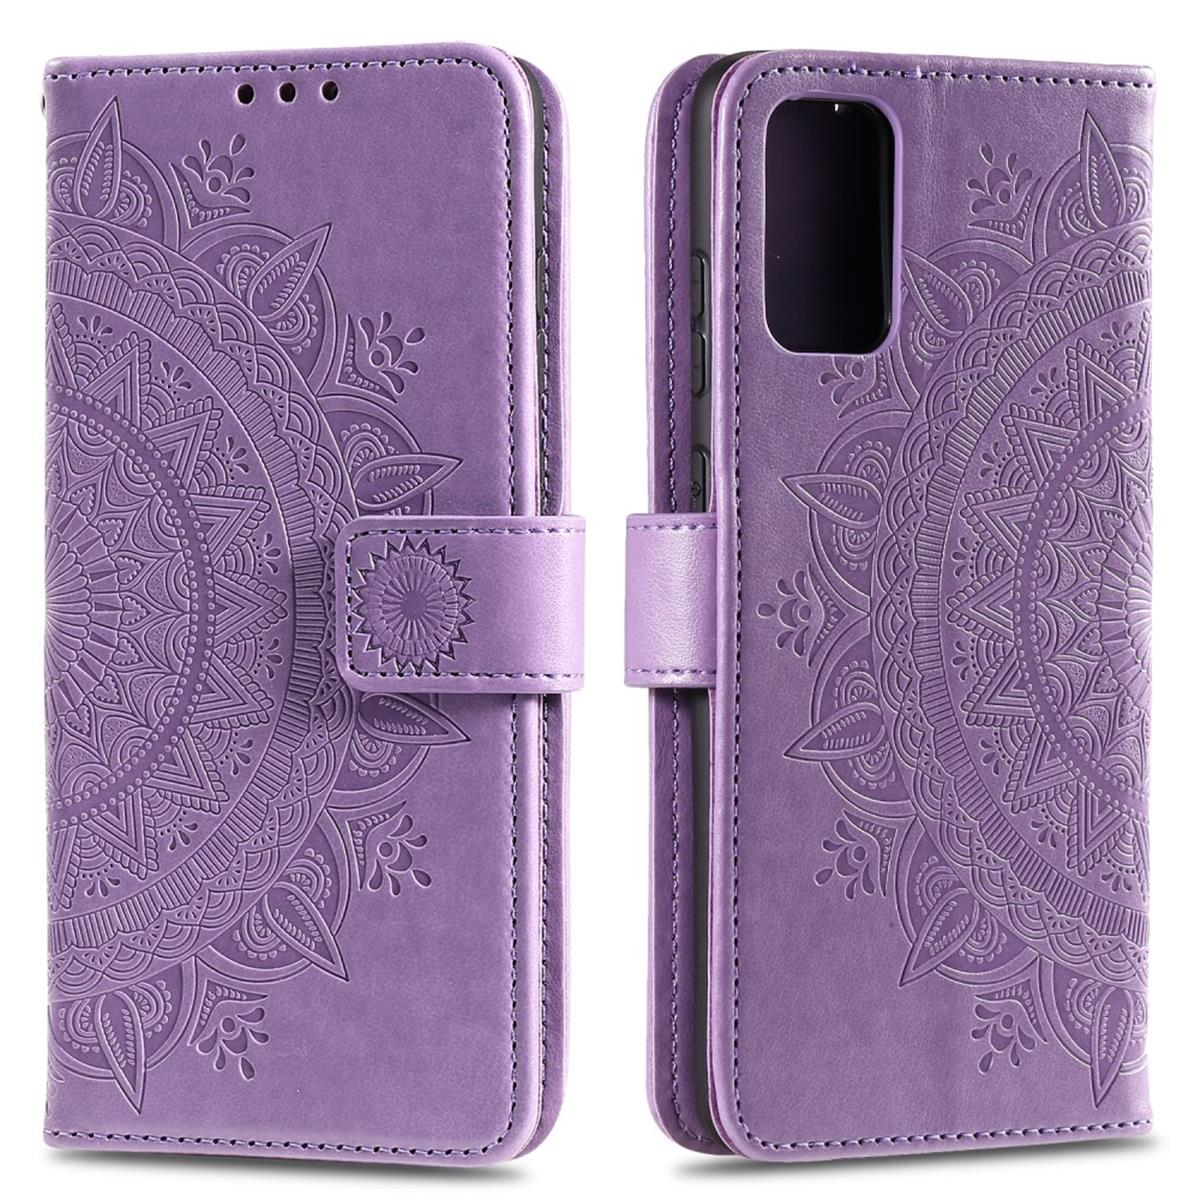 Lila Muster, Klapphülle Galaxy mit Bookcover, M31s, COVERKINGZ Mandala Samsung,